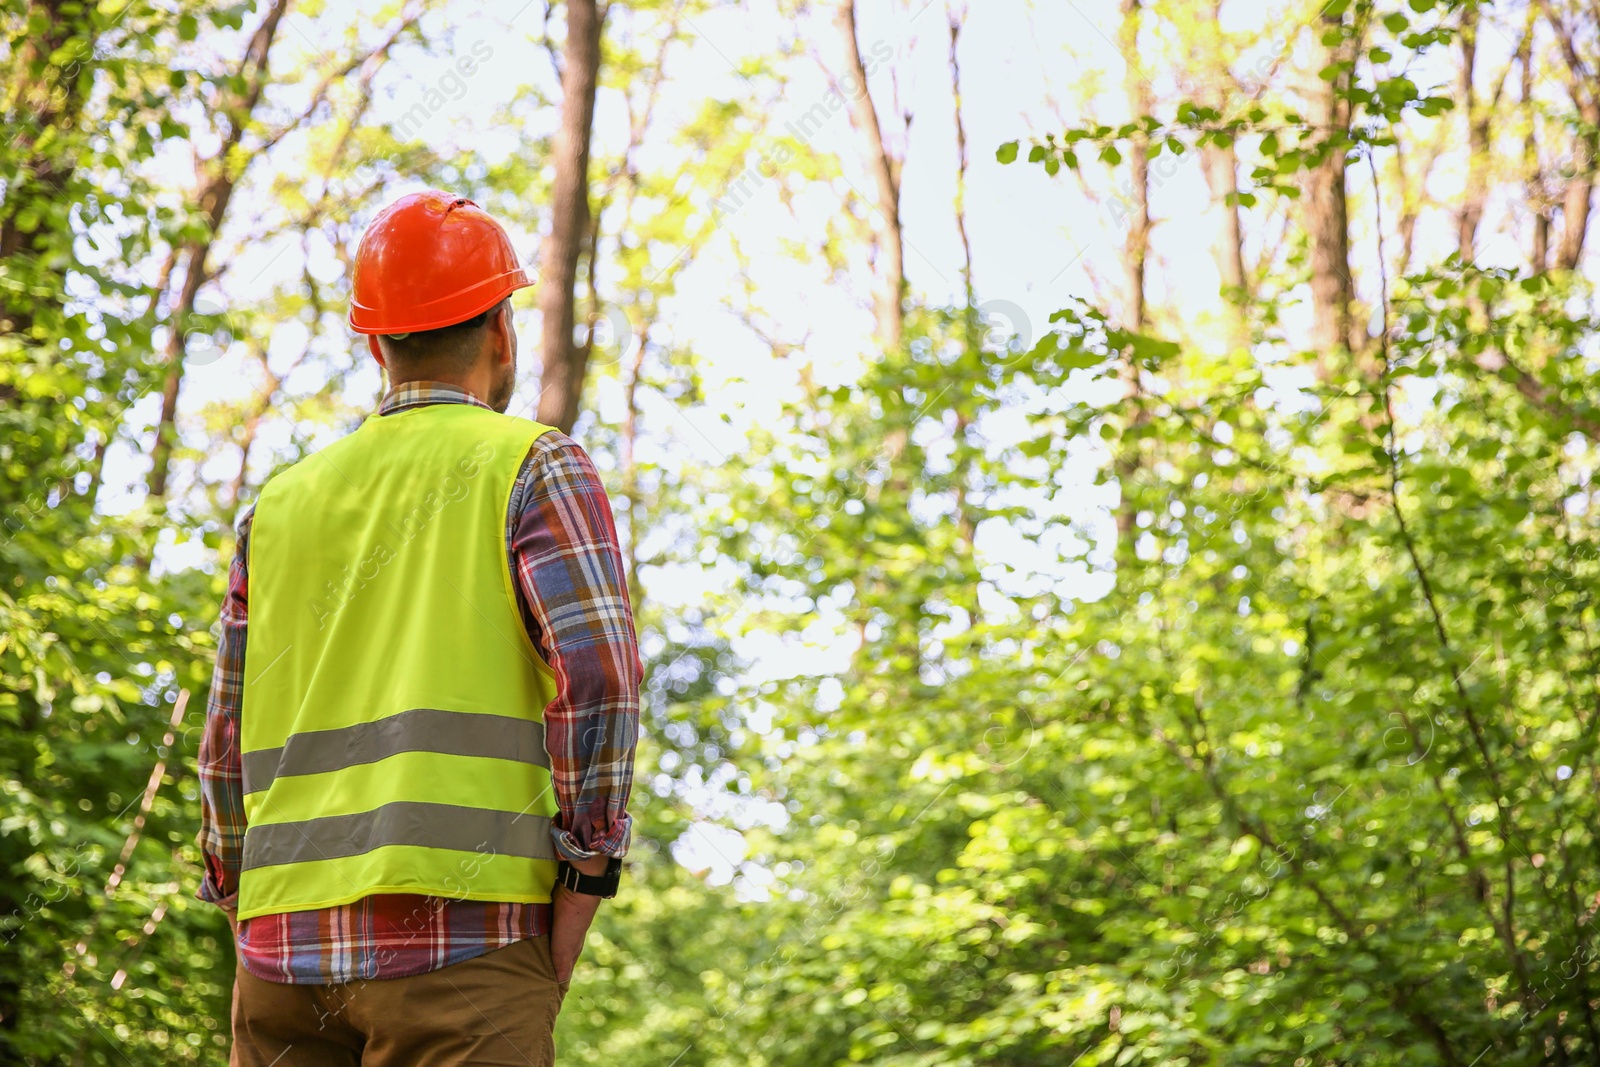 Photo of Forester in hard hat examining plants in forest, back view